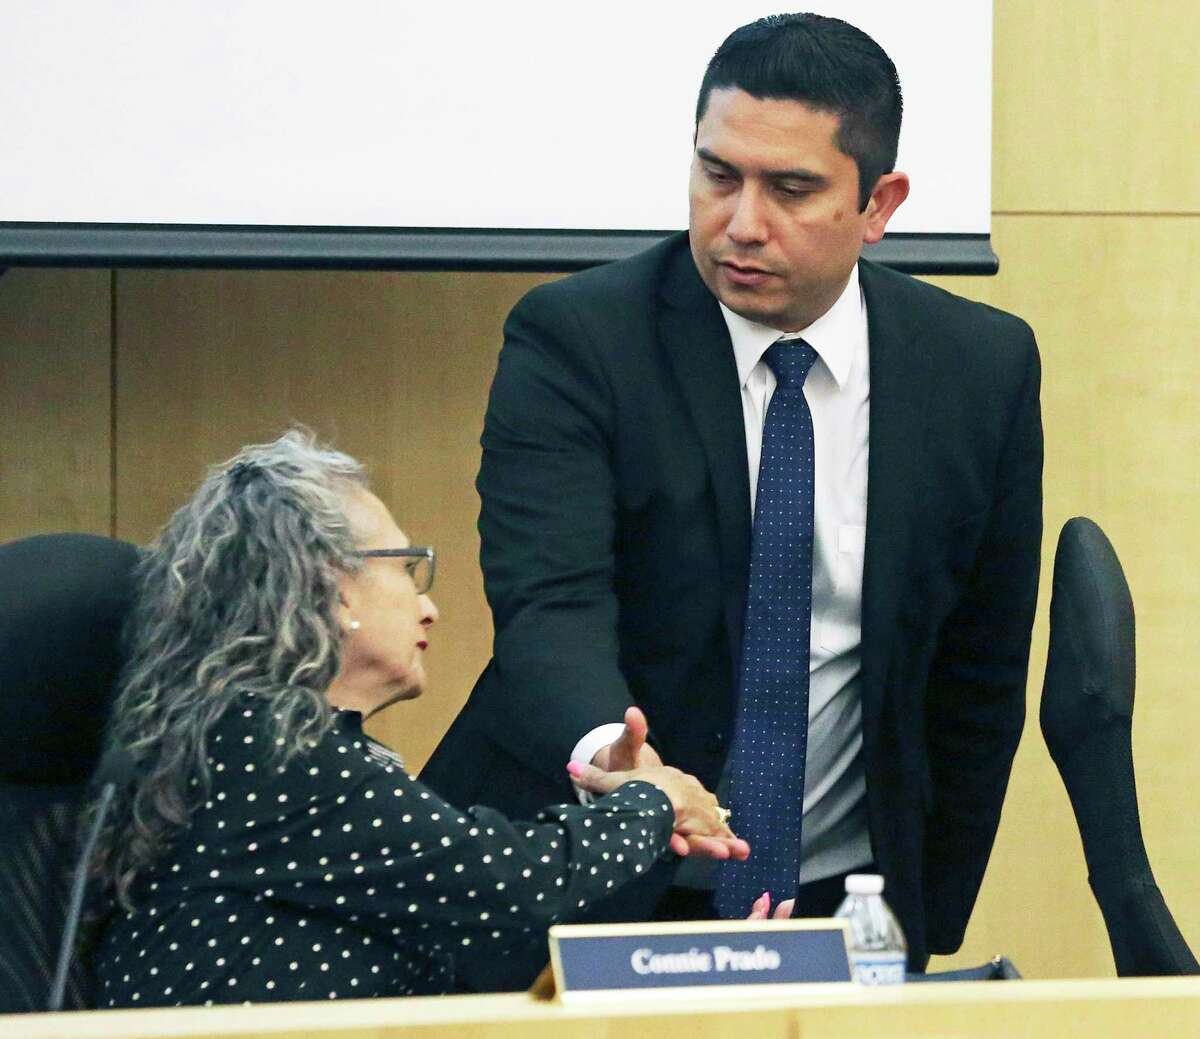 Former South San ISD superintendent Alex Flores shakes hands with Board President Connie Prado just before taking a buyout. South San has been plagued by governance issues, but consolidation isn’t the solution. School finance reform is a better solution.